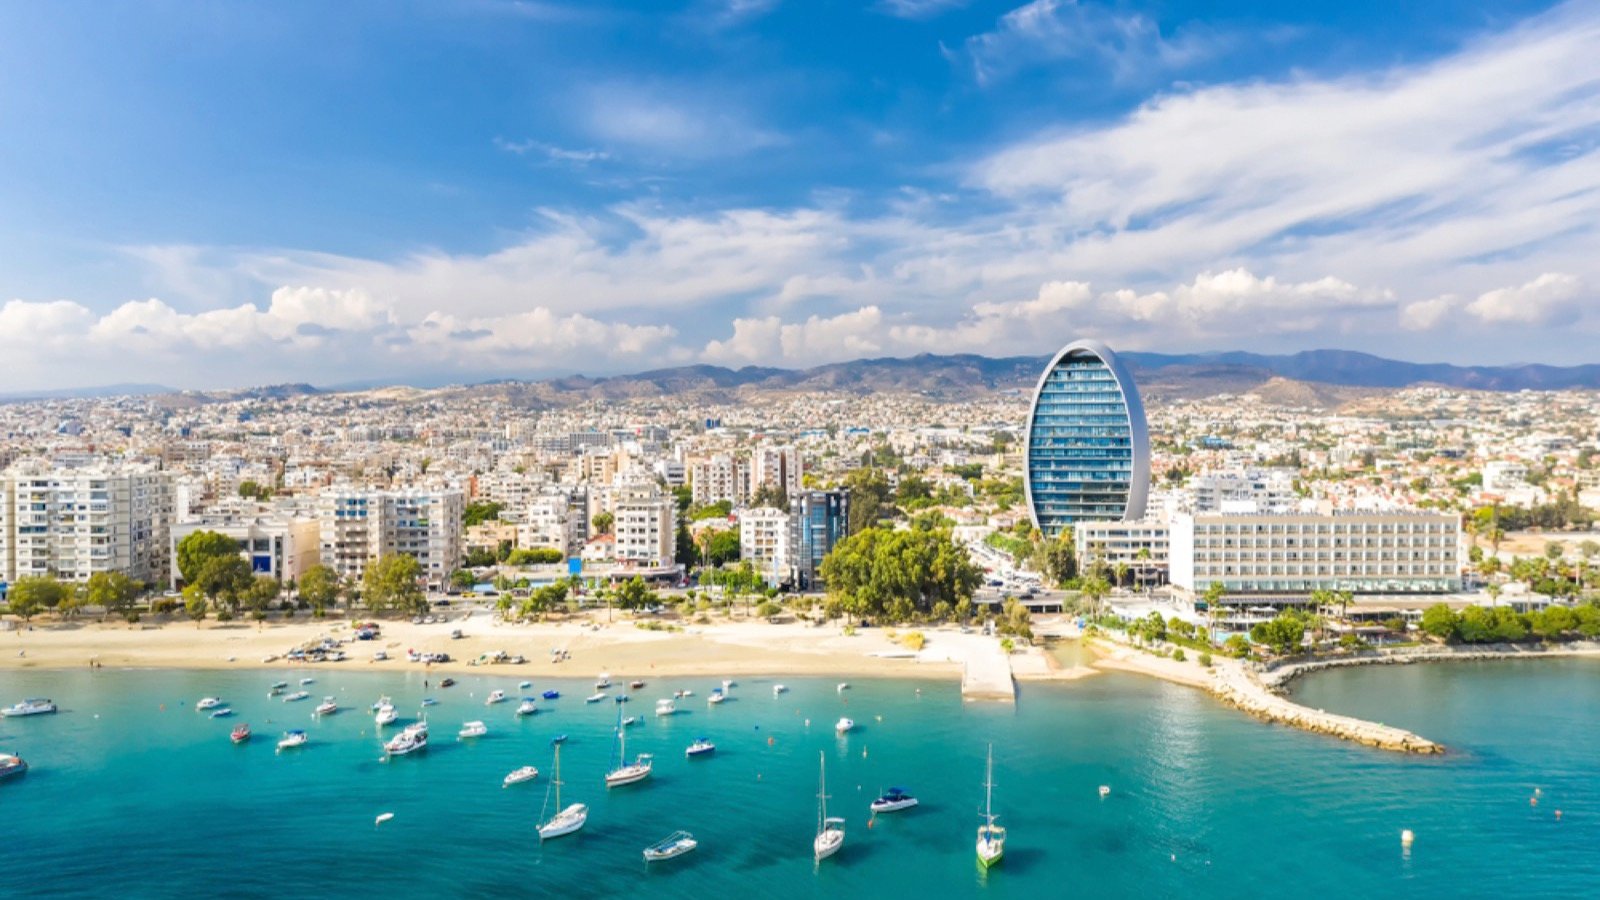 <p>This Mediterranean country is a big tourist destination but is also very affordable for retirees. It’s hard to believe a country so beautiful can be so affordable. For about $1,500 a month, you can retire in this island paradise.</p>